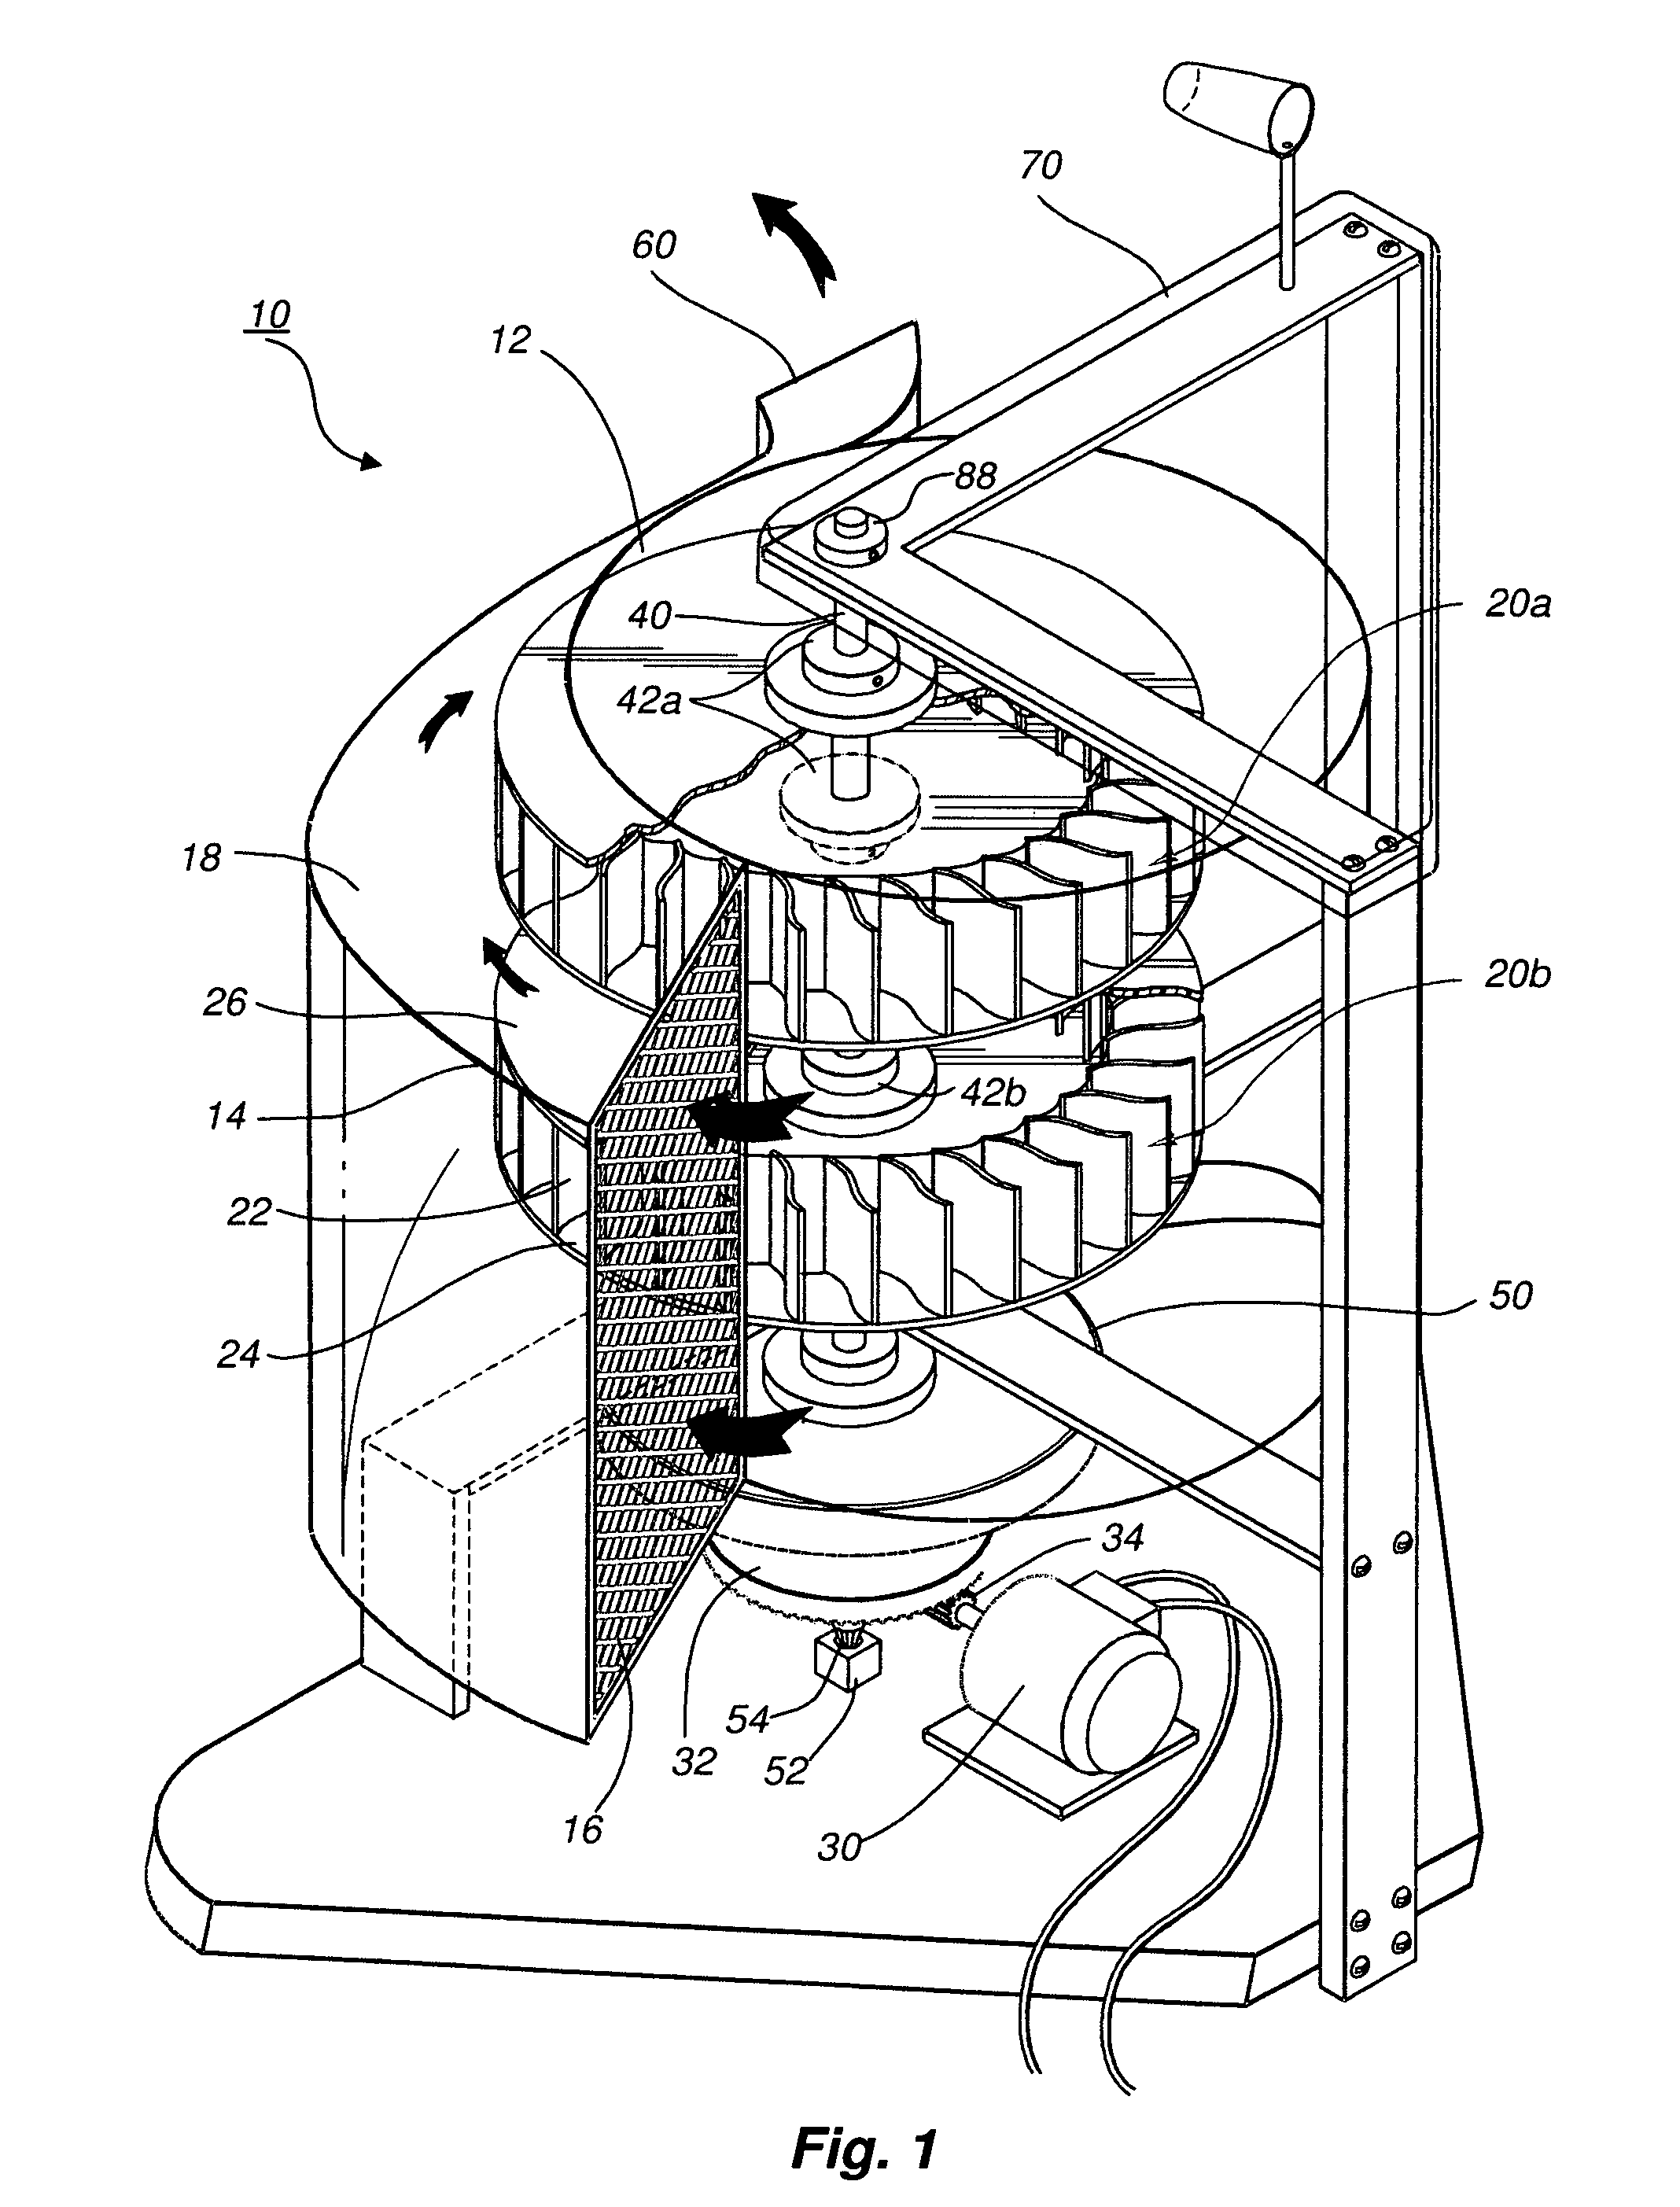 Protective wind energy conversion chamber